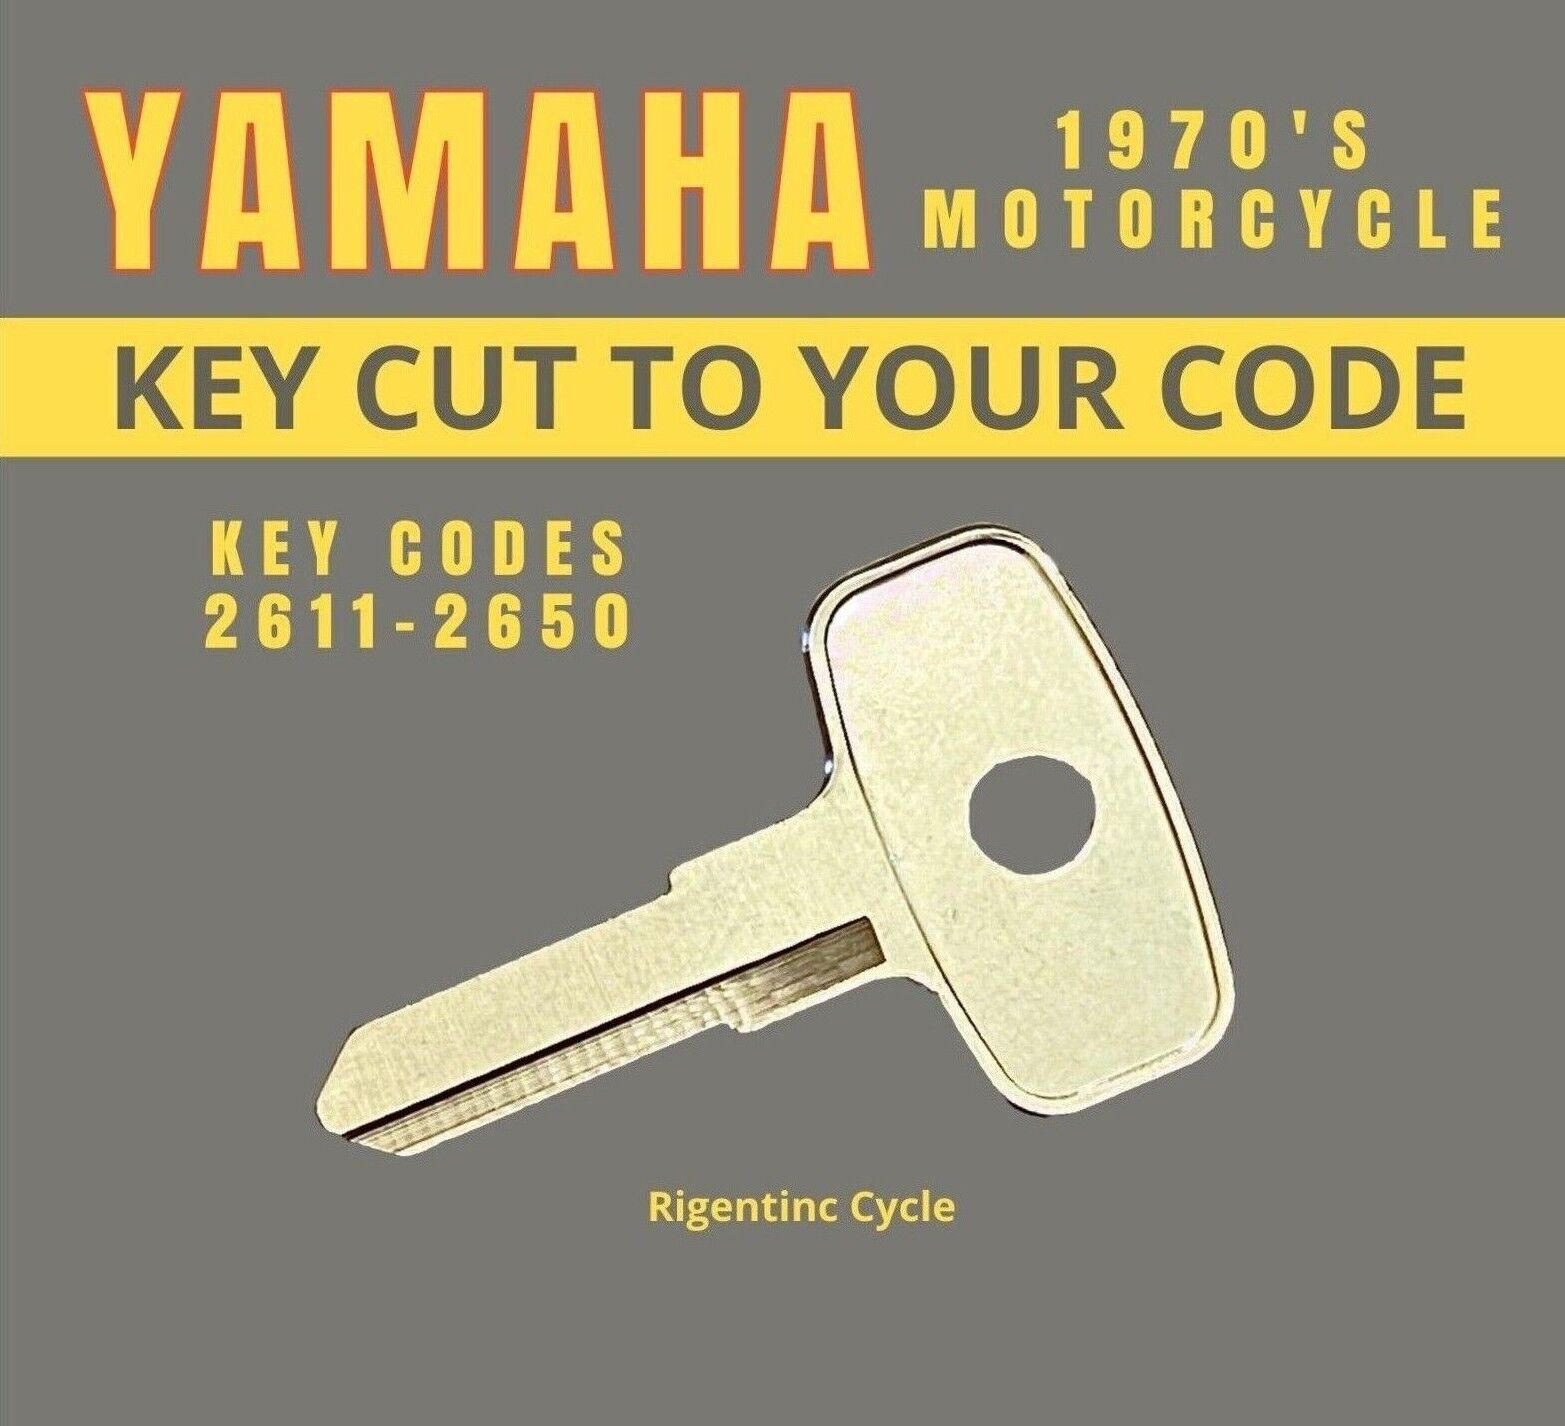 1970's Yamaha Motorcycle Replacement Key Cut to Code 2611-2650 